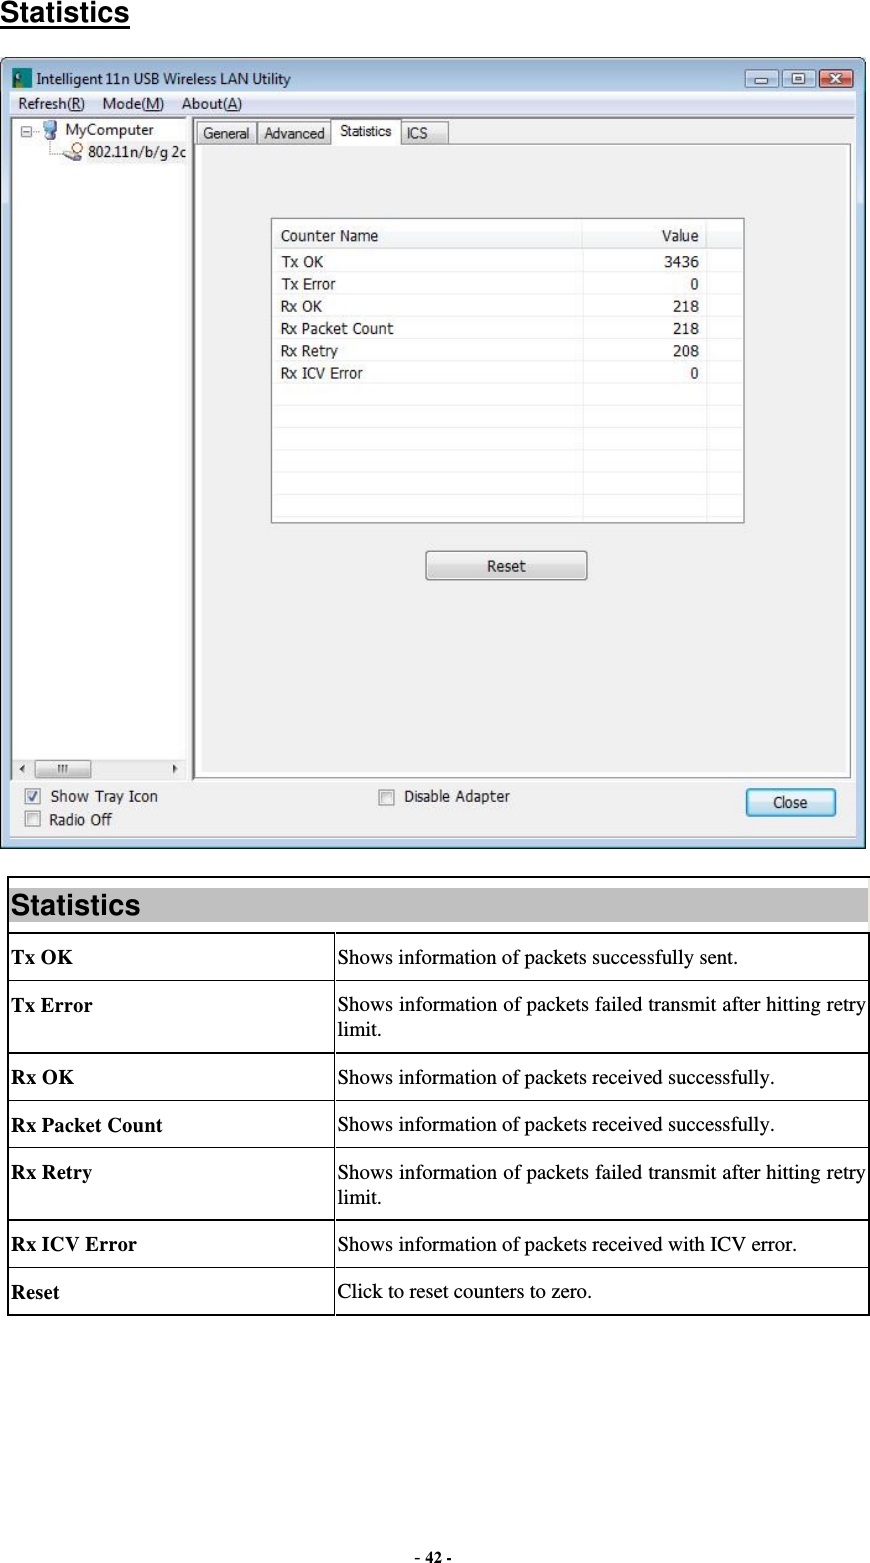  - 42 - Statistics  Statistics Tx OK  Shows information of packets successfully sent. Tx Error  Shows information of packets failed transmit after hitting retry limit. Rx OK  Shows information of packets received successfully. Rx Packet Count  Shows information of packets received successfully. Rx Retry  Shows information of packets failed transmit after hitting retry limit. Rx ICV Error  Shows information of packets received with ICV error. Reset  Click to reset counters to zero.  